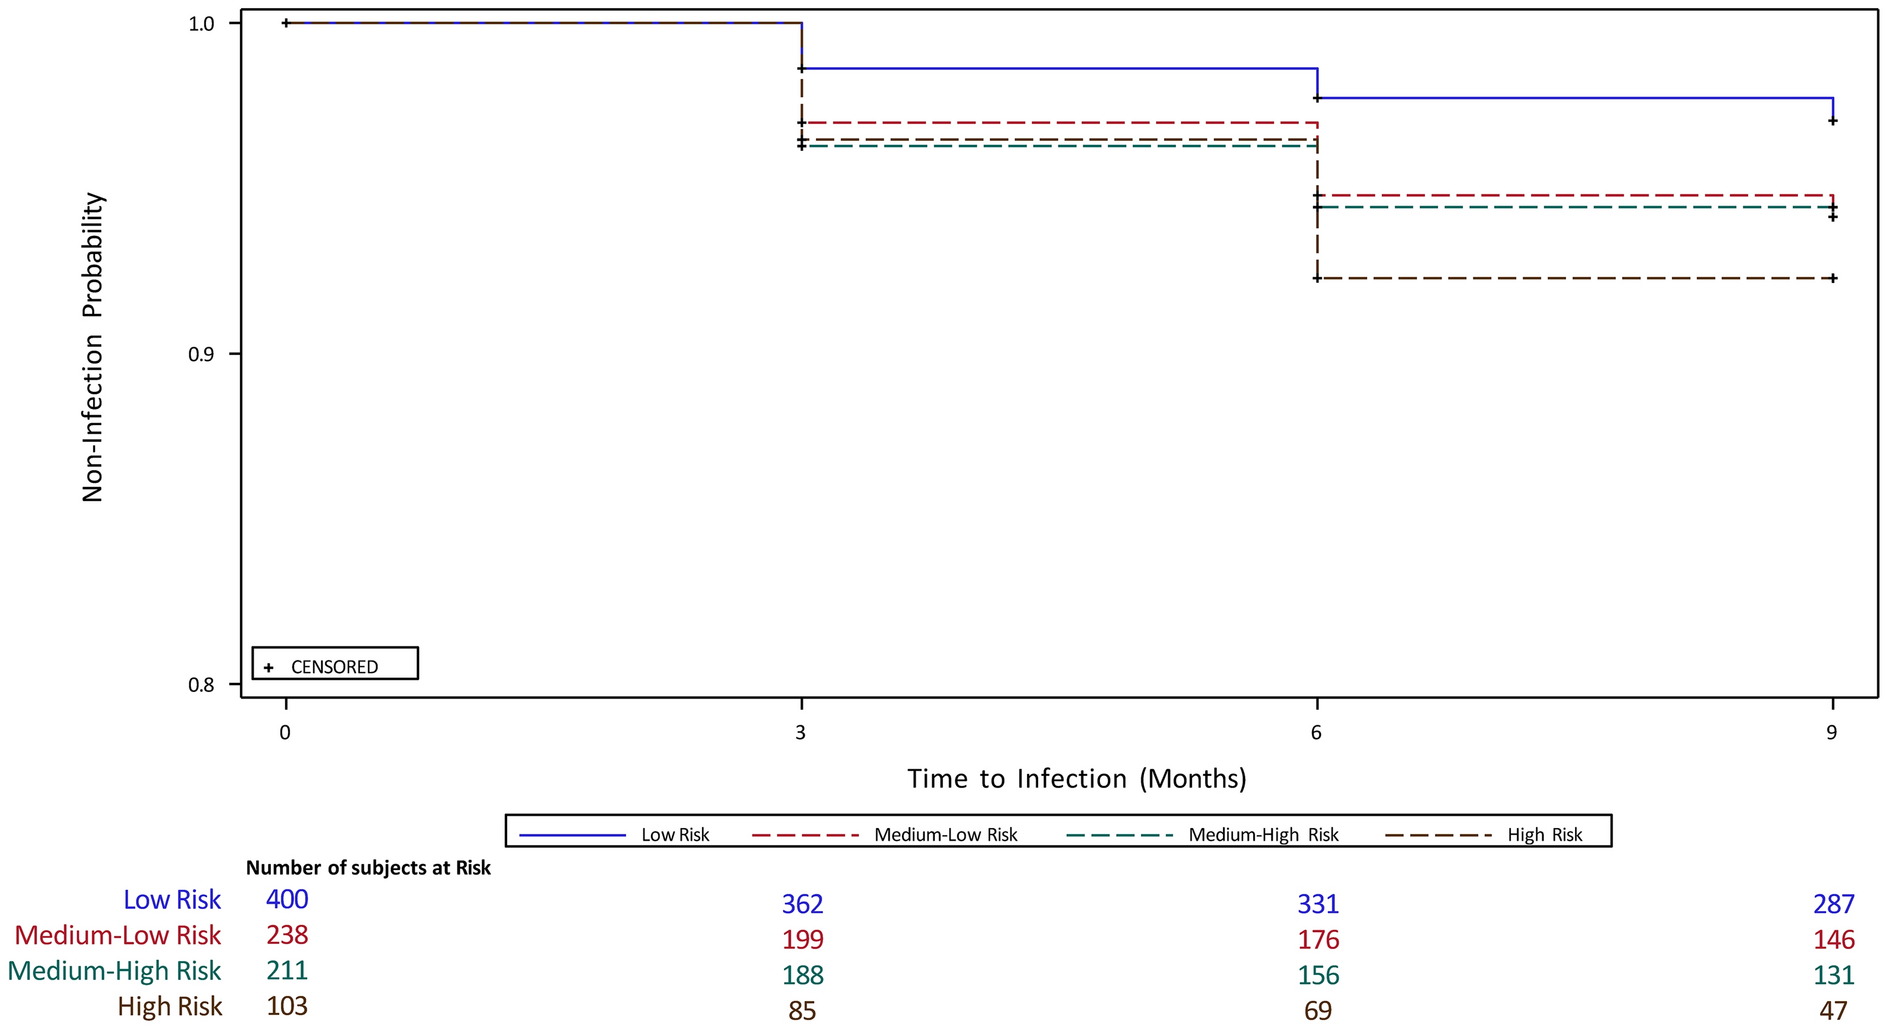 Longitudinal Molecular and Serological Evidence of SARS-CoV-2 Infections and Vaccination Status: Community-Based Surveillance Study (CONTACT)